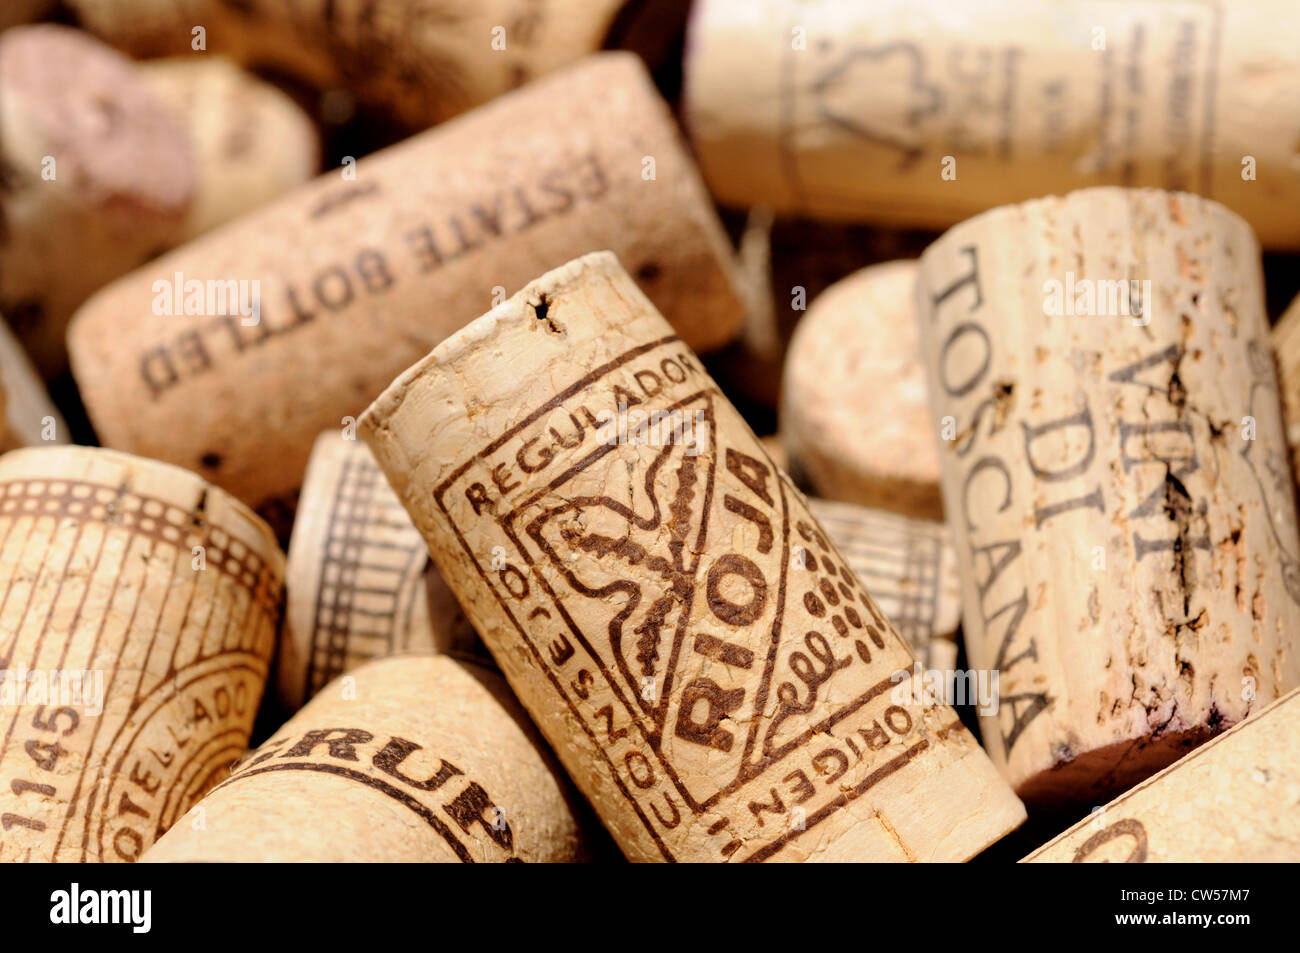 Collection of wine bottle corks, Andalusia, Spain, Western Europe. Stock Photo